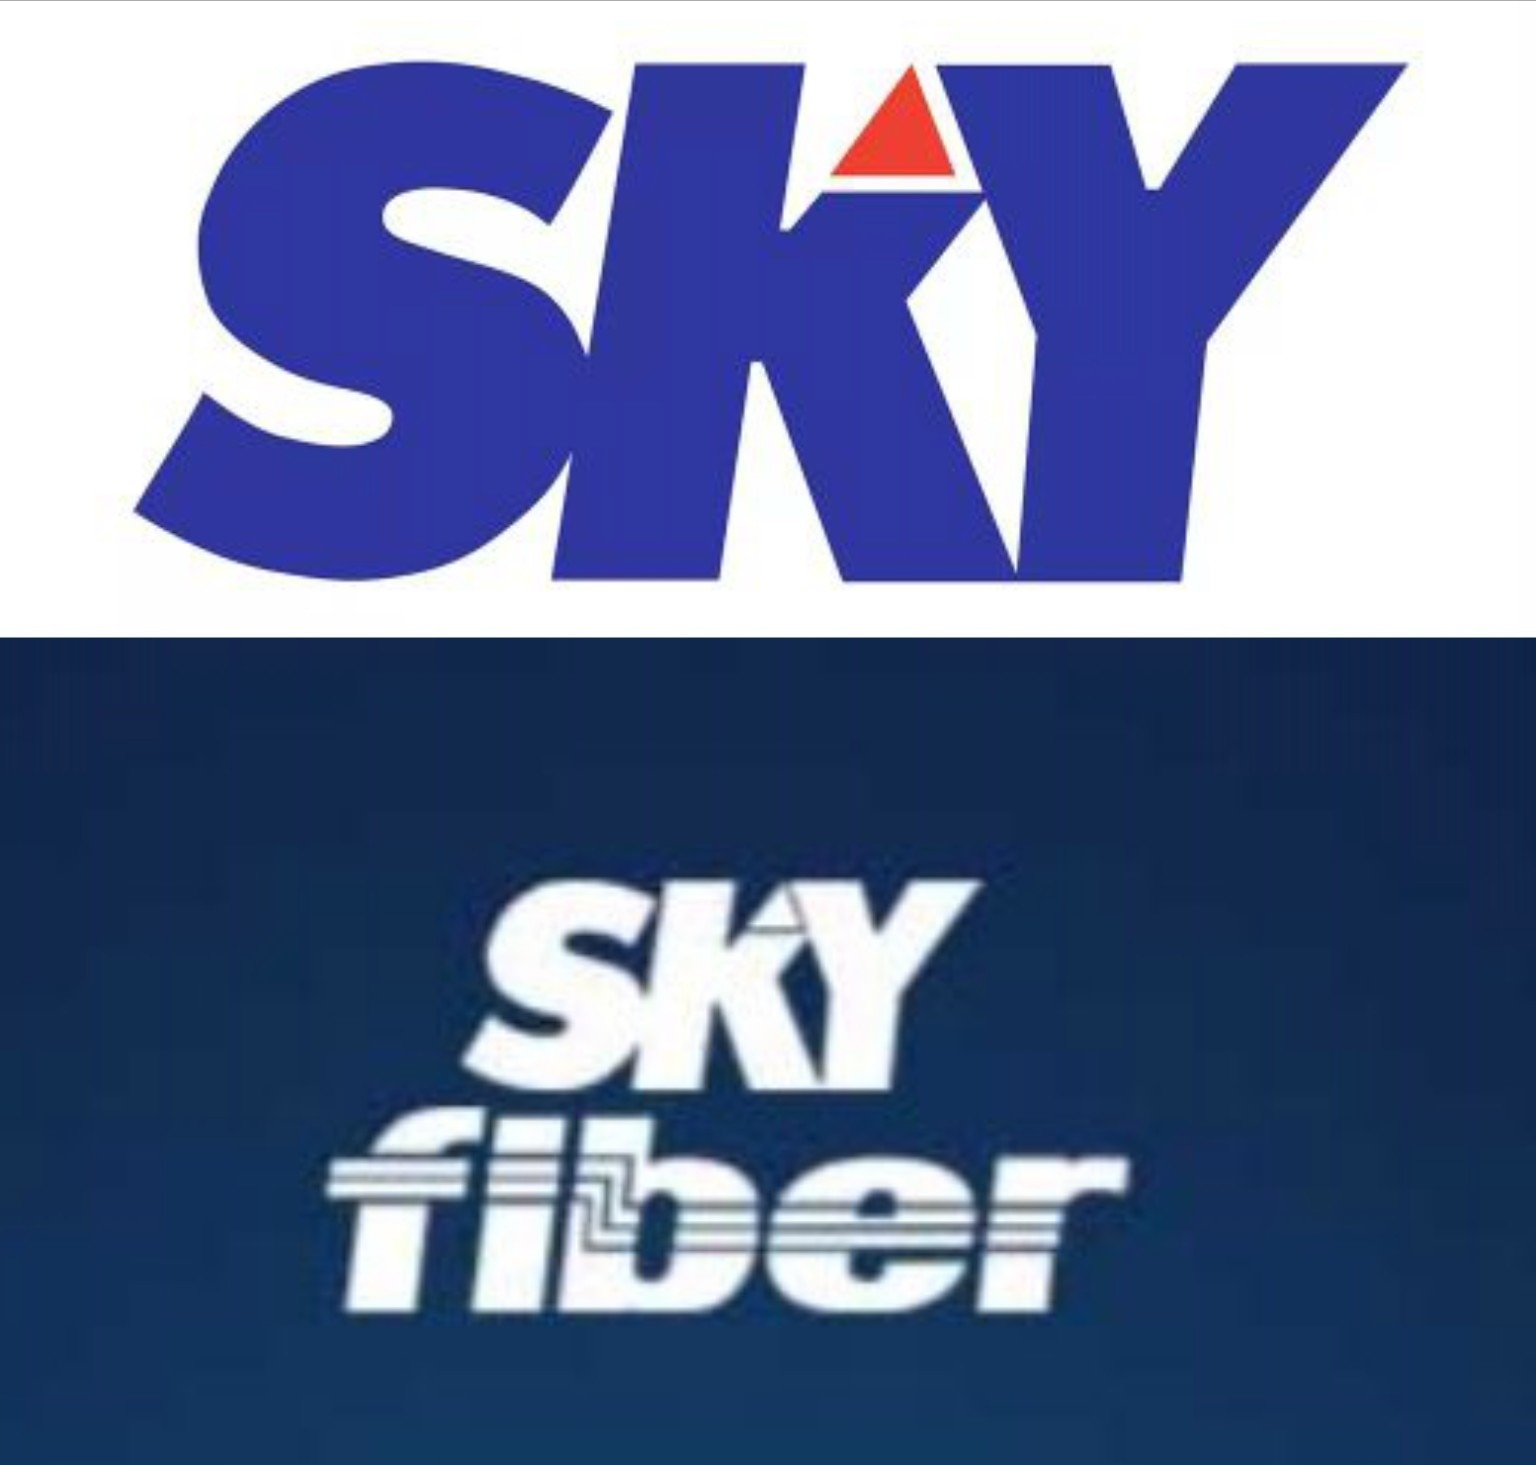 SKYcable and SKY Fiber continue to operate